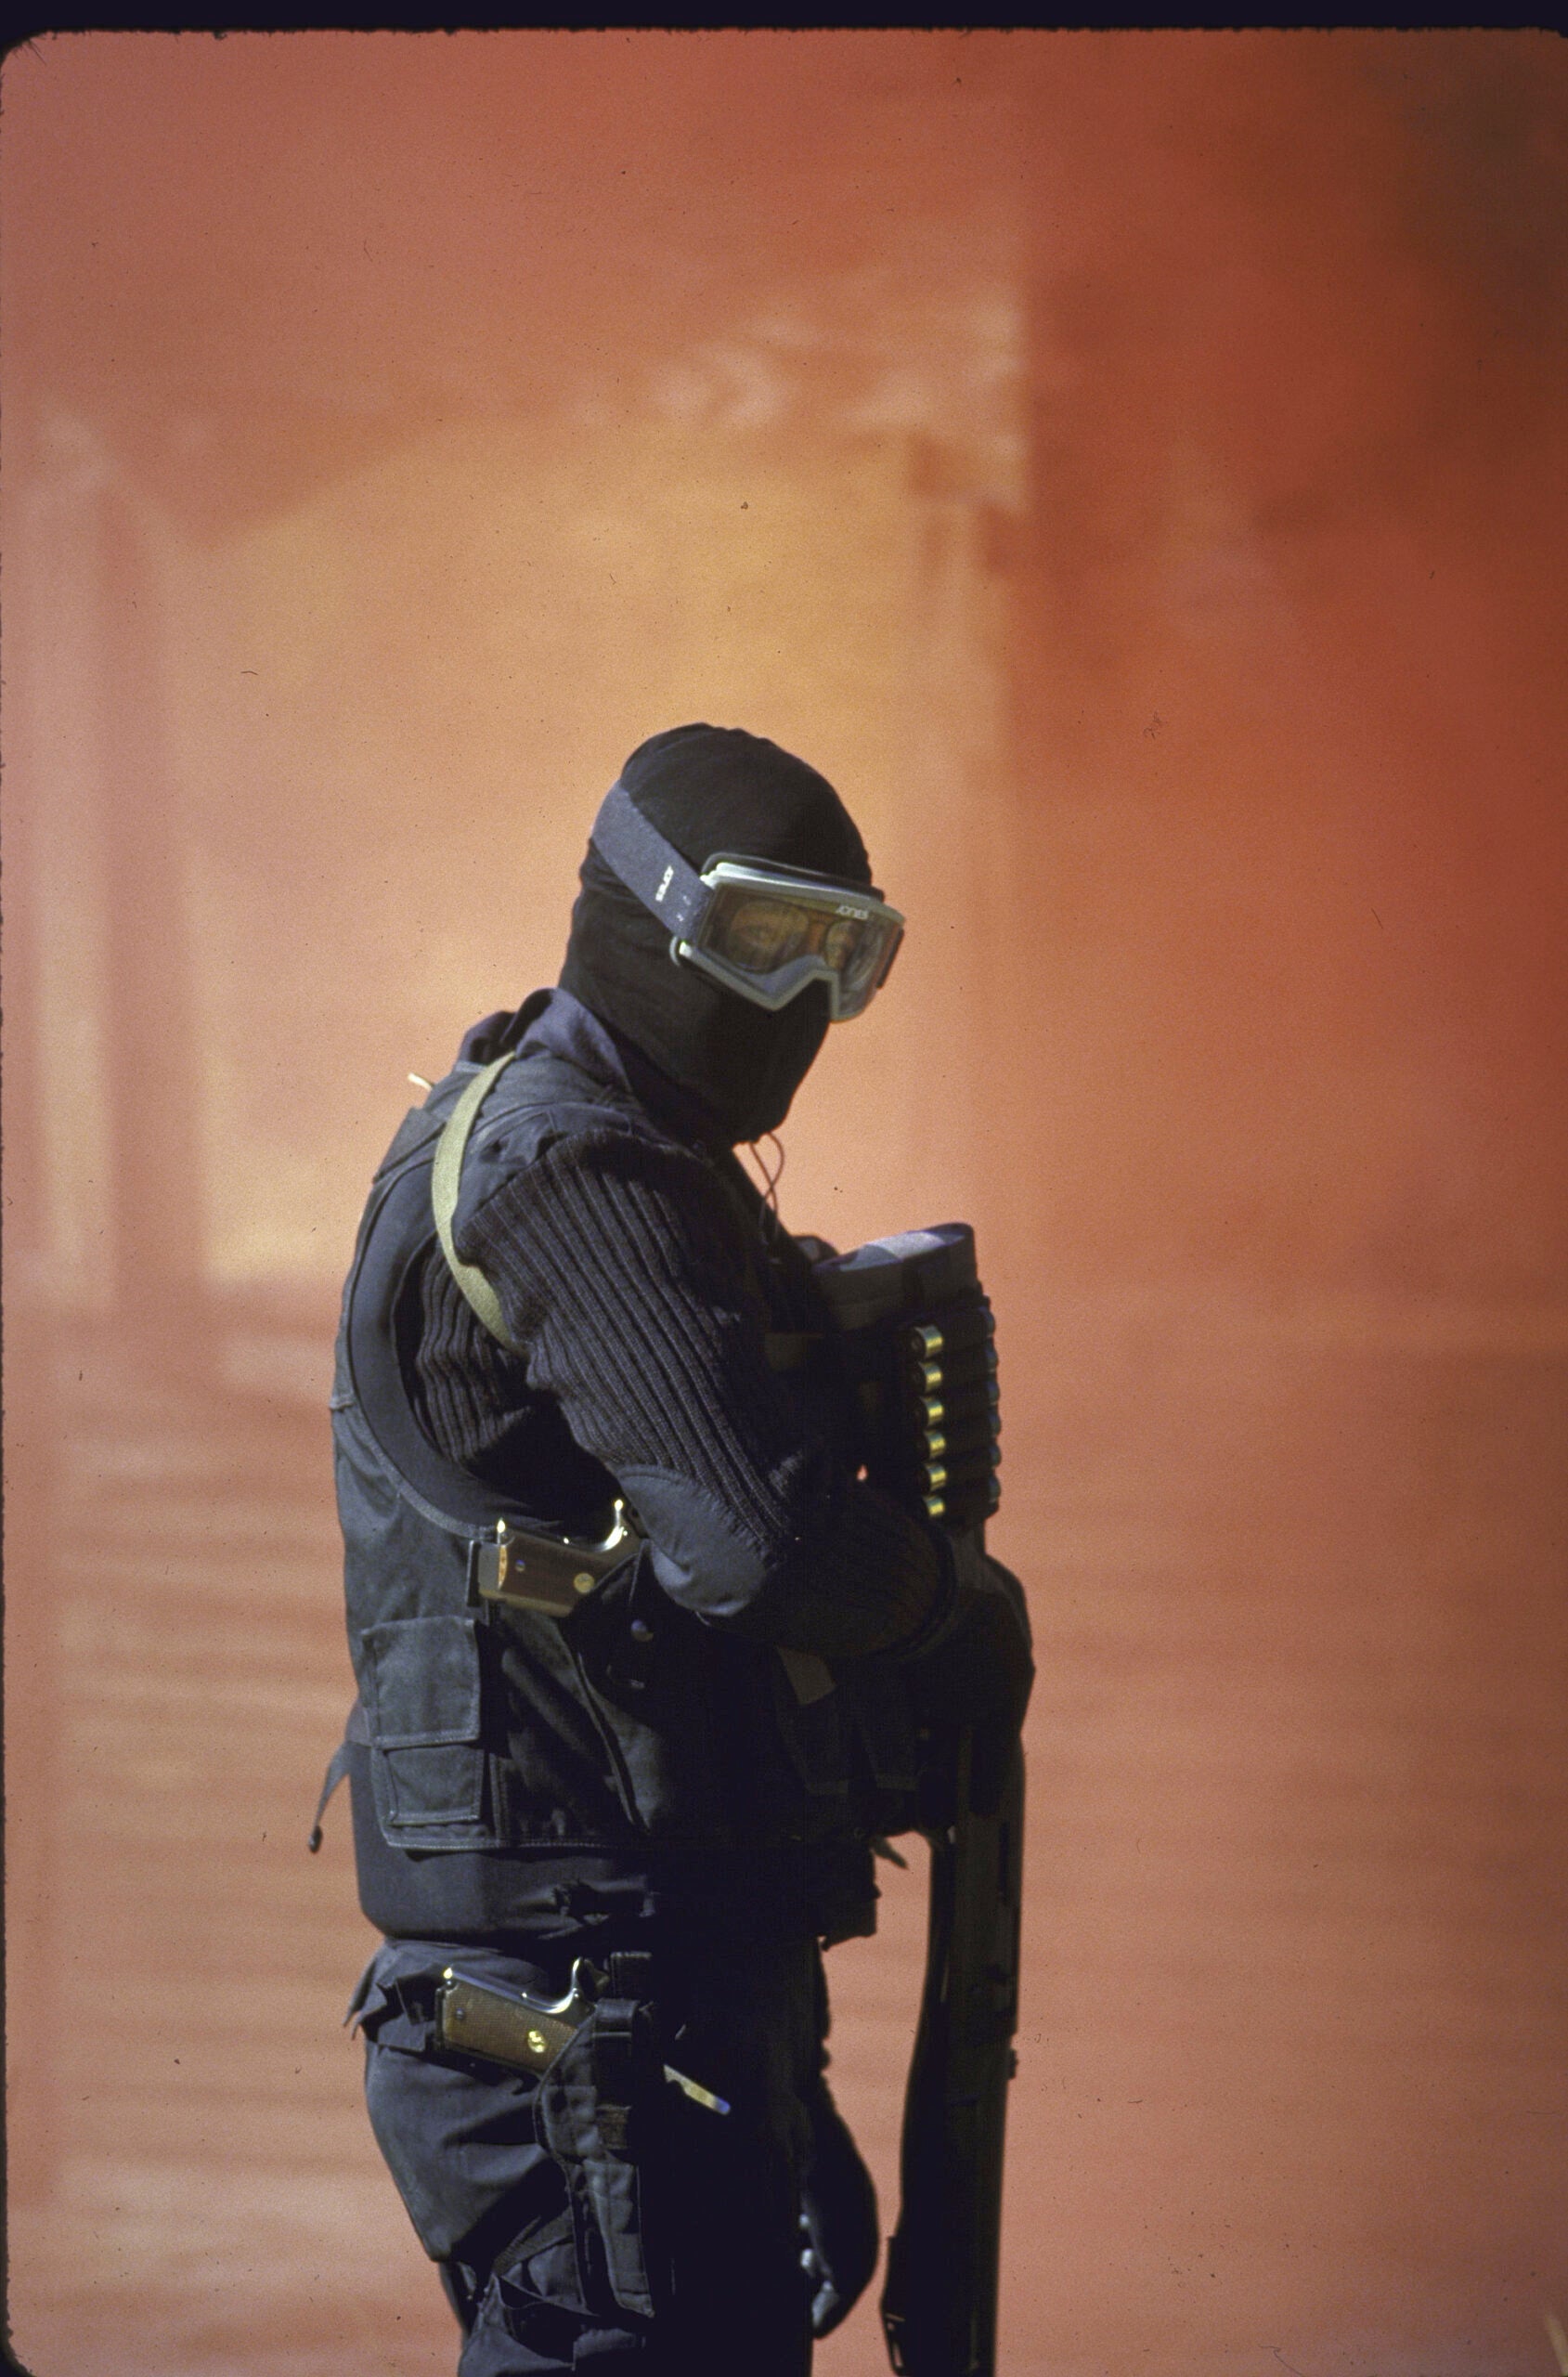 Anti-nuclear terrorist team entrusted with moving government's nuclear arsenal around country; in action during simulated attack, with guns, wearing black combat garb, face masks and protective goggles.    (Photo by Steve Northup/Getty Images)